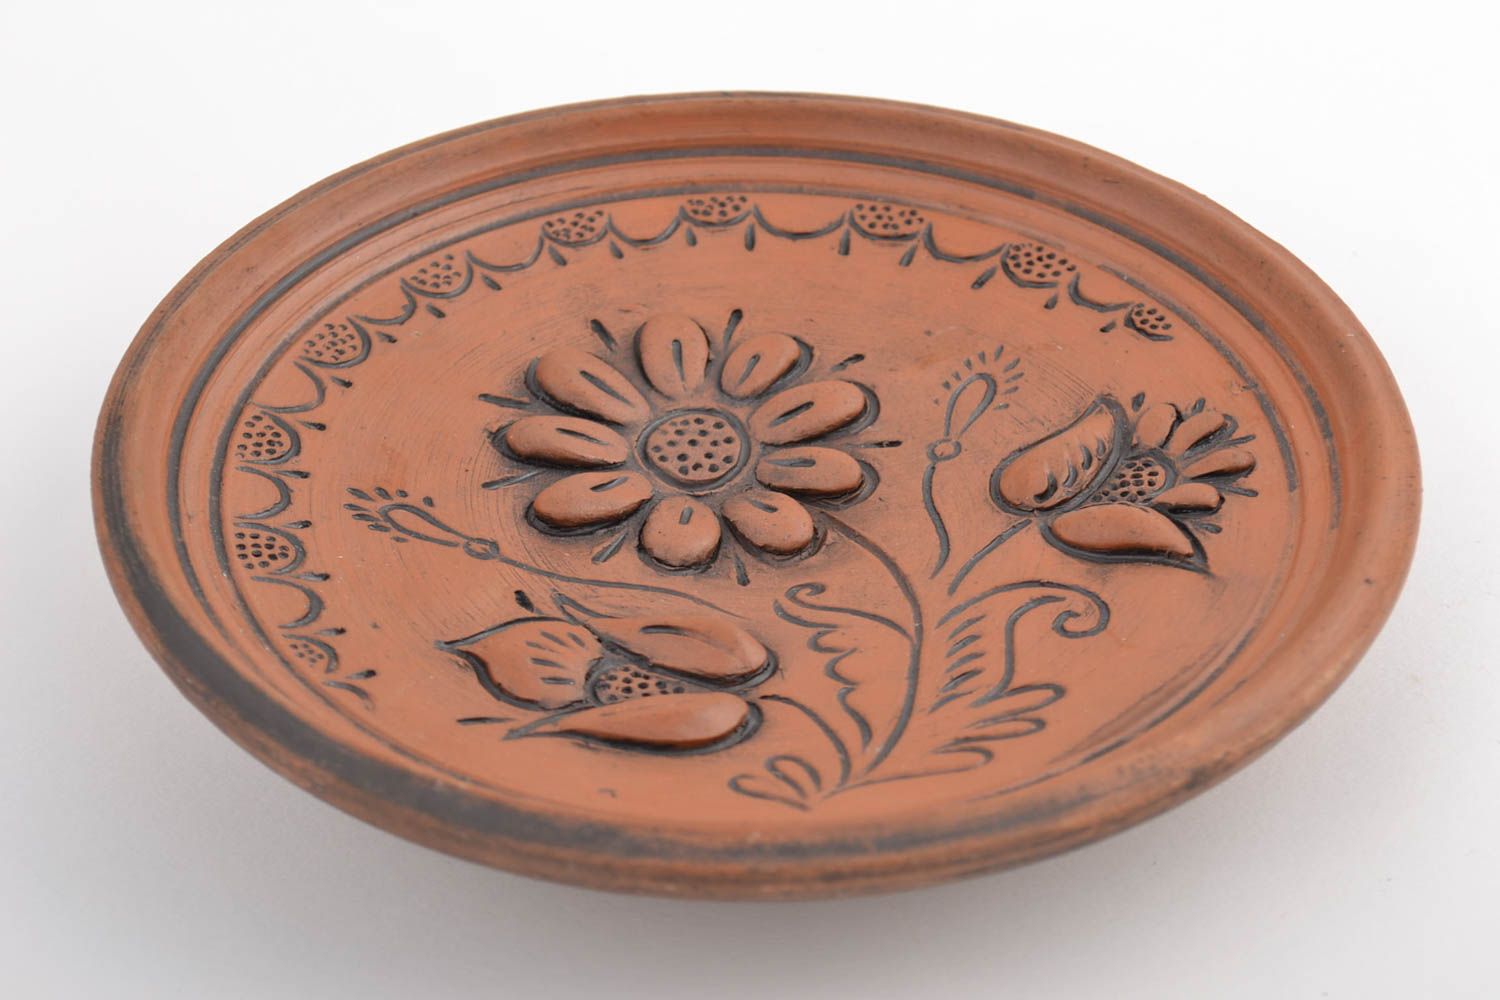 Handmade decorative ceramic wall plate with relief flower image kilned with milk photo 2